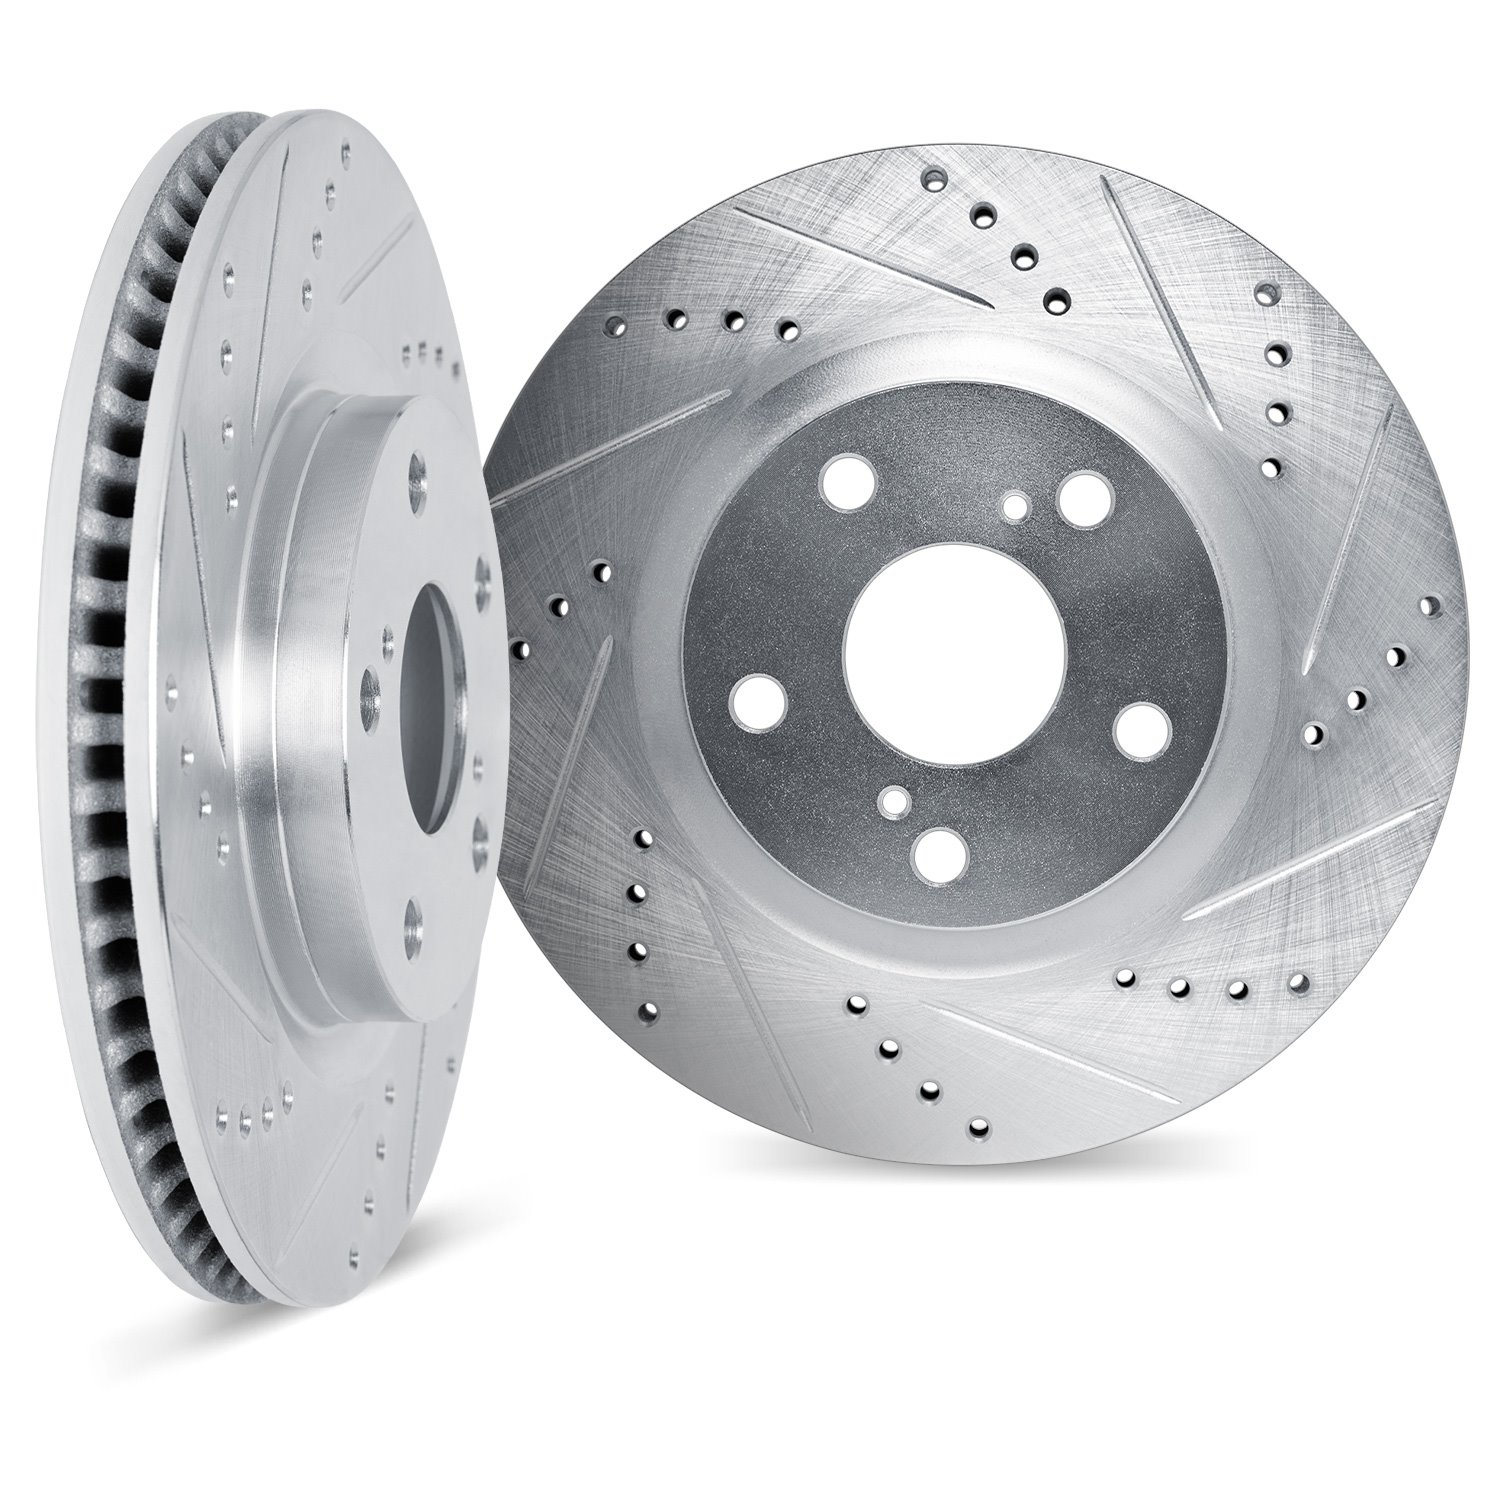 Drilled/Slotted Brake Rotors [Silver], 1992-1995 Lexus/Toyota/Scion